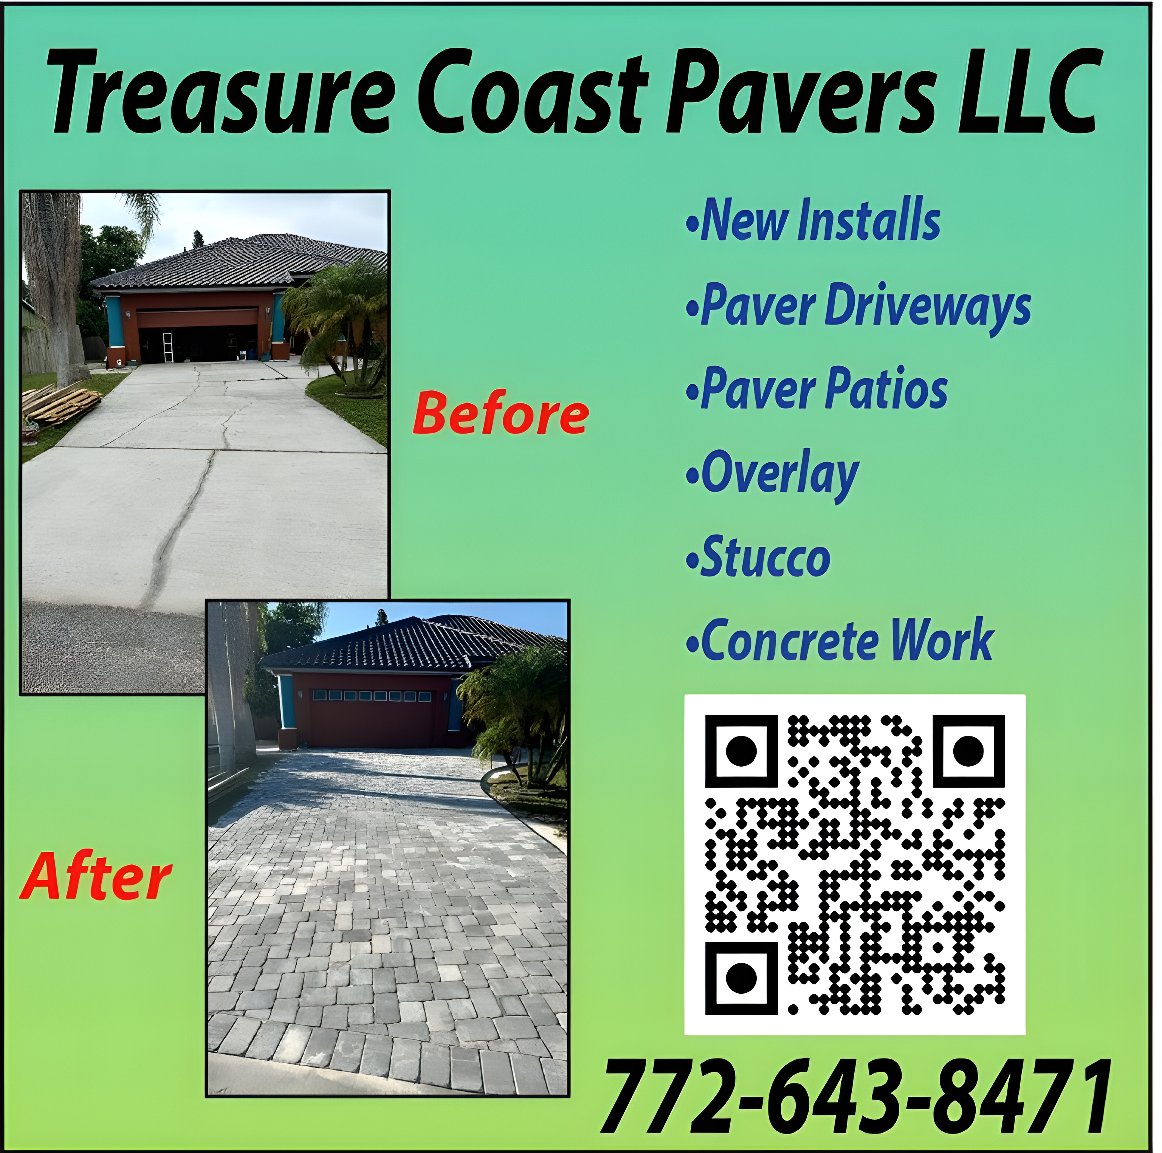 Treasure Coast Pavers LLC does it all! Call today for any of the services listed!! #pavers #newdriveway #concretework #treasurecoast #floridabusiness #orangepeeladvertiser